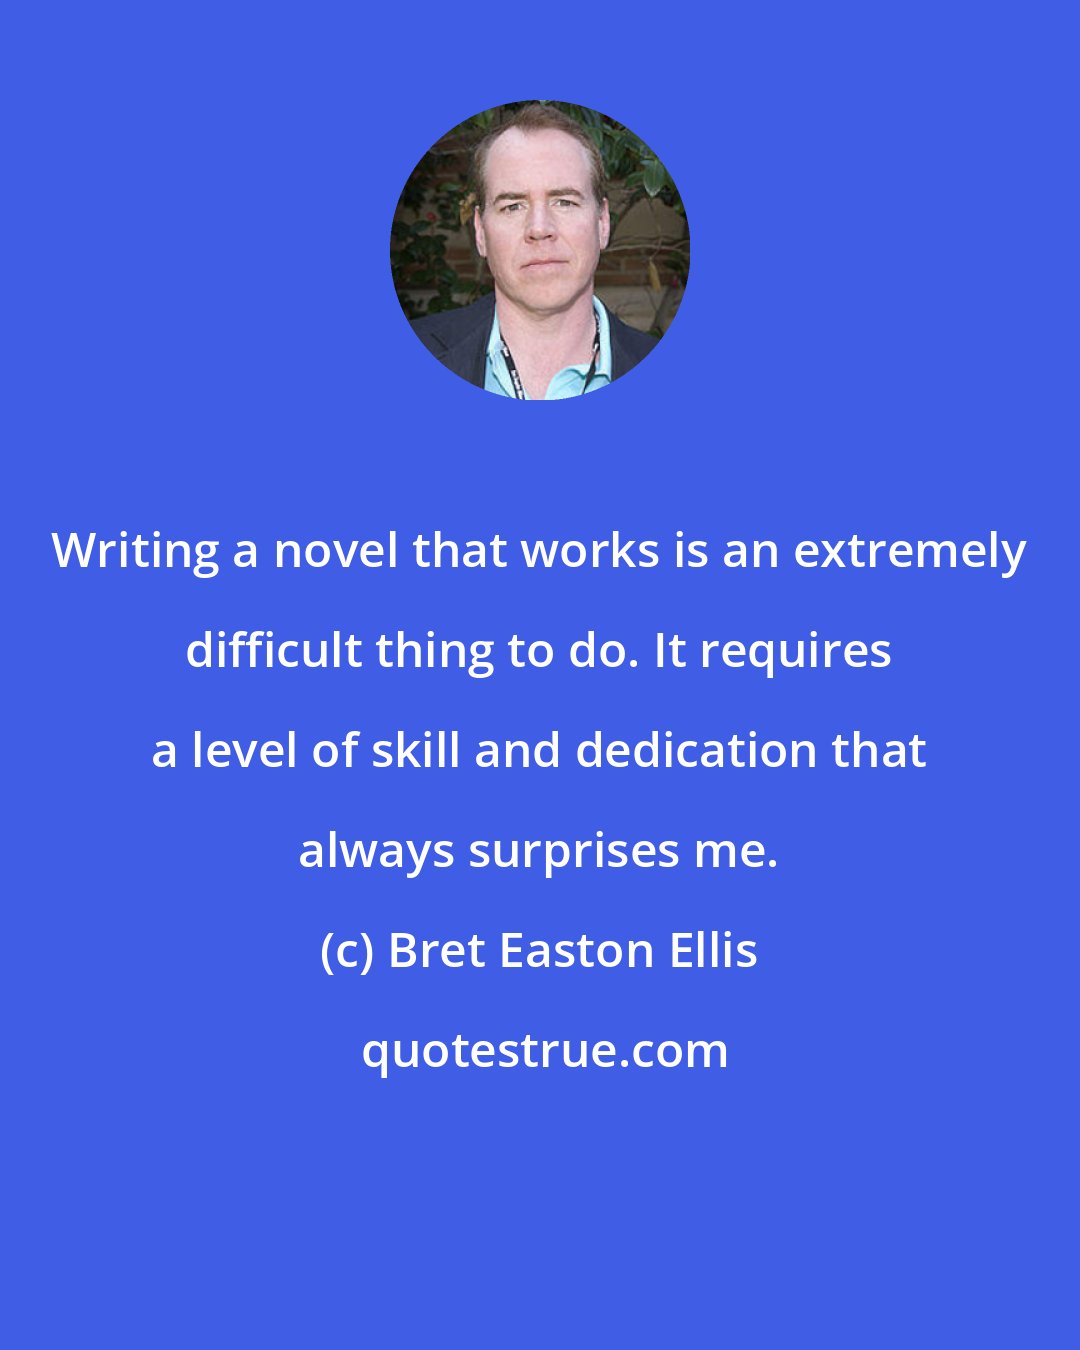 Bret Easton Ellis: Writing a novel that works is an extremely difficult thing to do. It requires a level of skill and dedication that always surprises me.